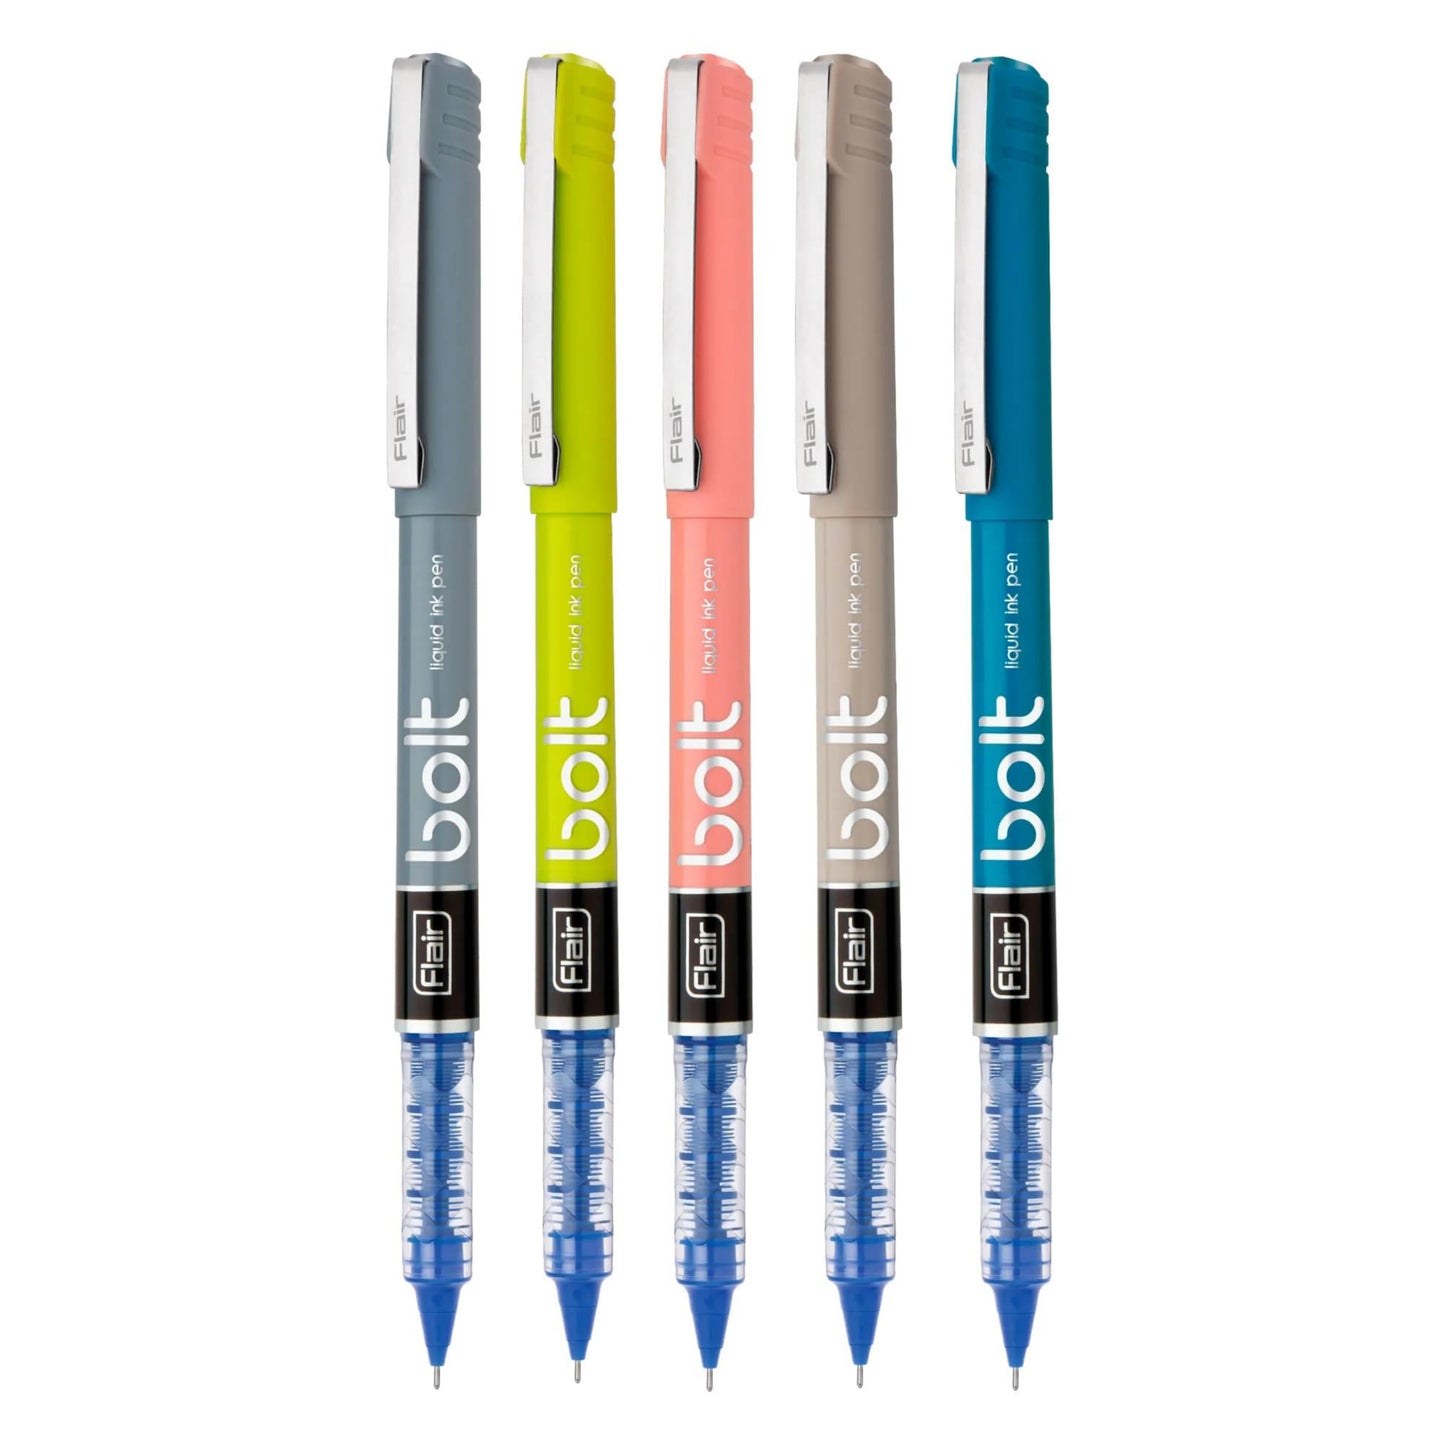 Flair Bolt Liquid Ink Pen | Elegant Looks | Japanese Technology | WaterProof Ink | Smudge Free Writing | Ideal for School, College & Office | Blue Pack of 5 Pc's